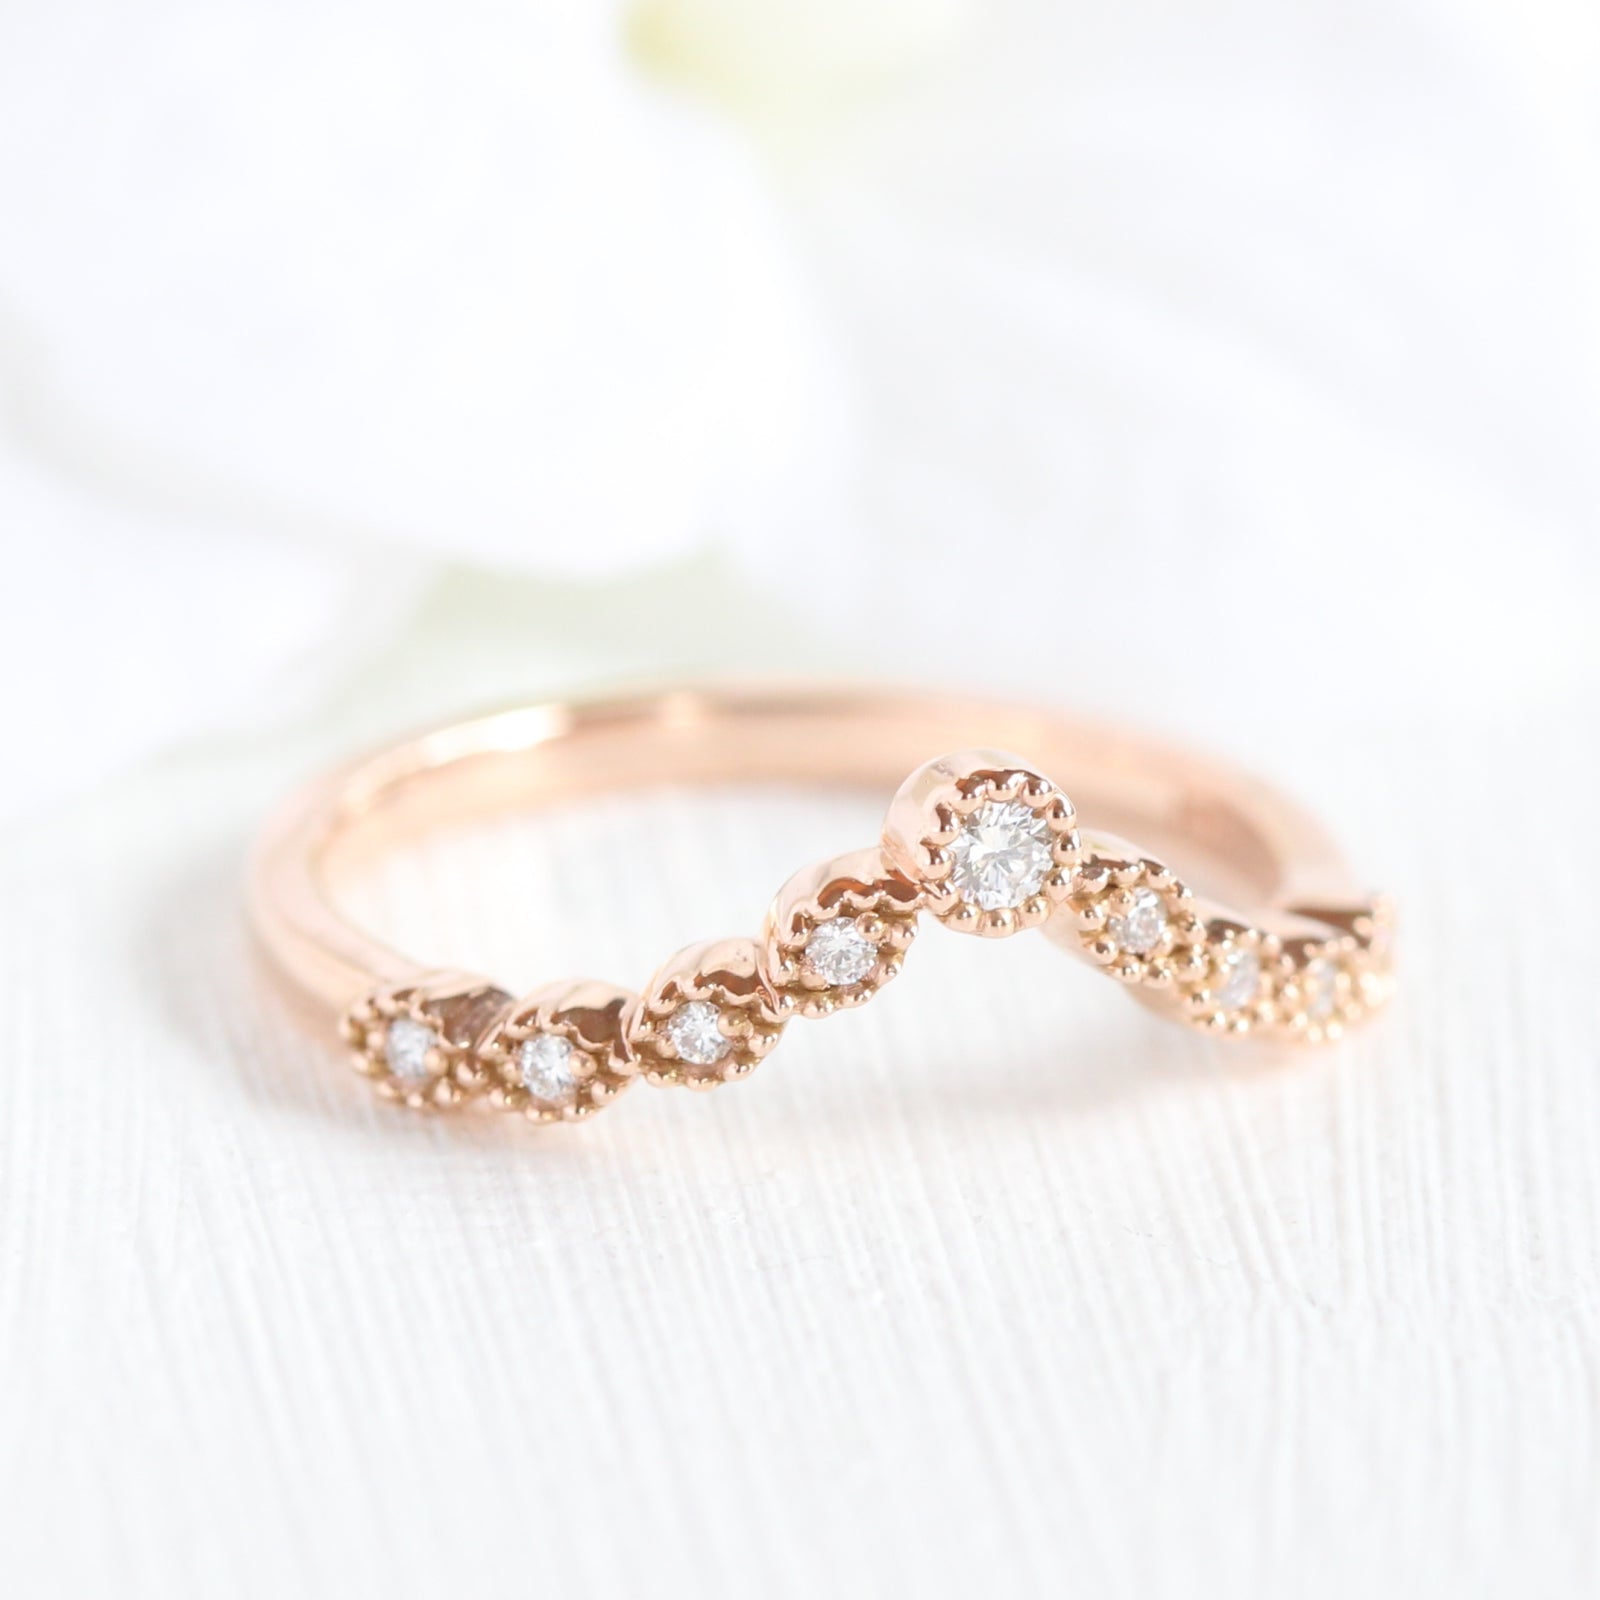 Curved diamond wedding ring in rose gold milgrain band by la more design